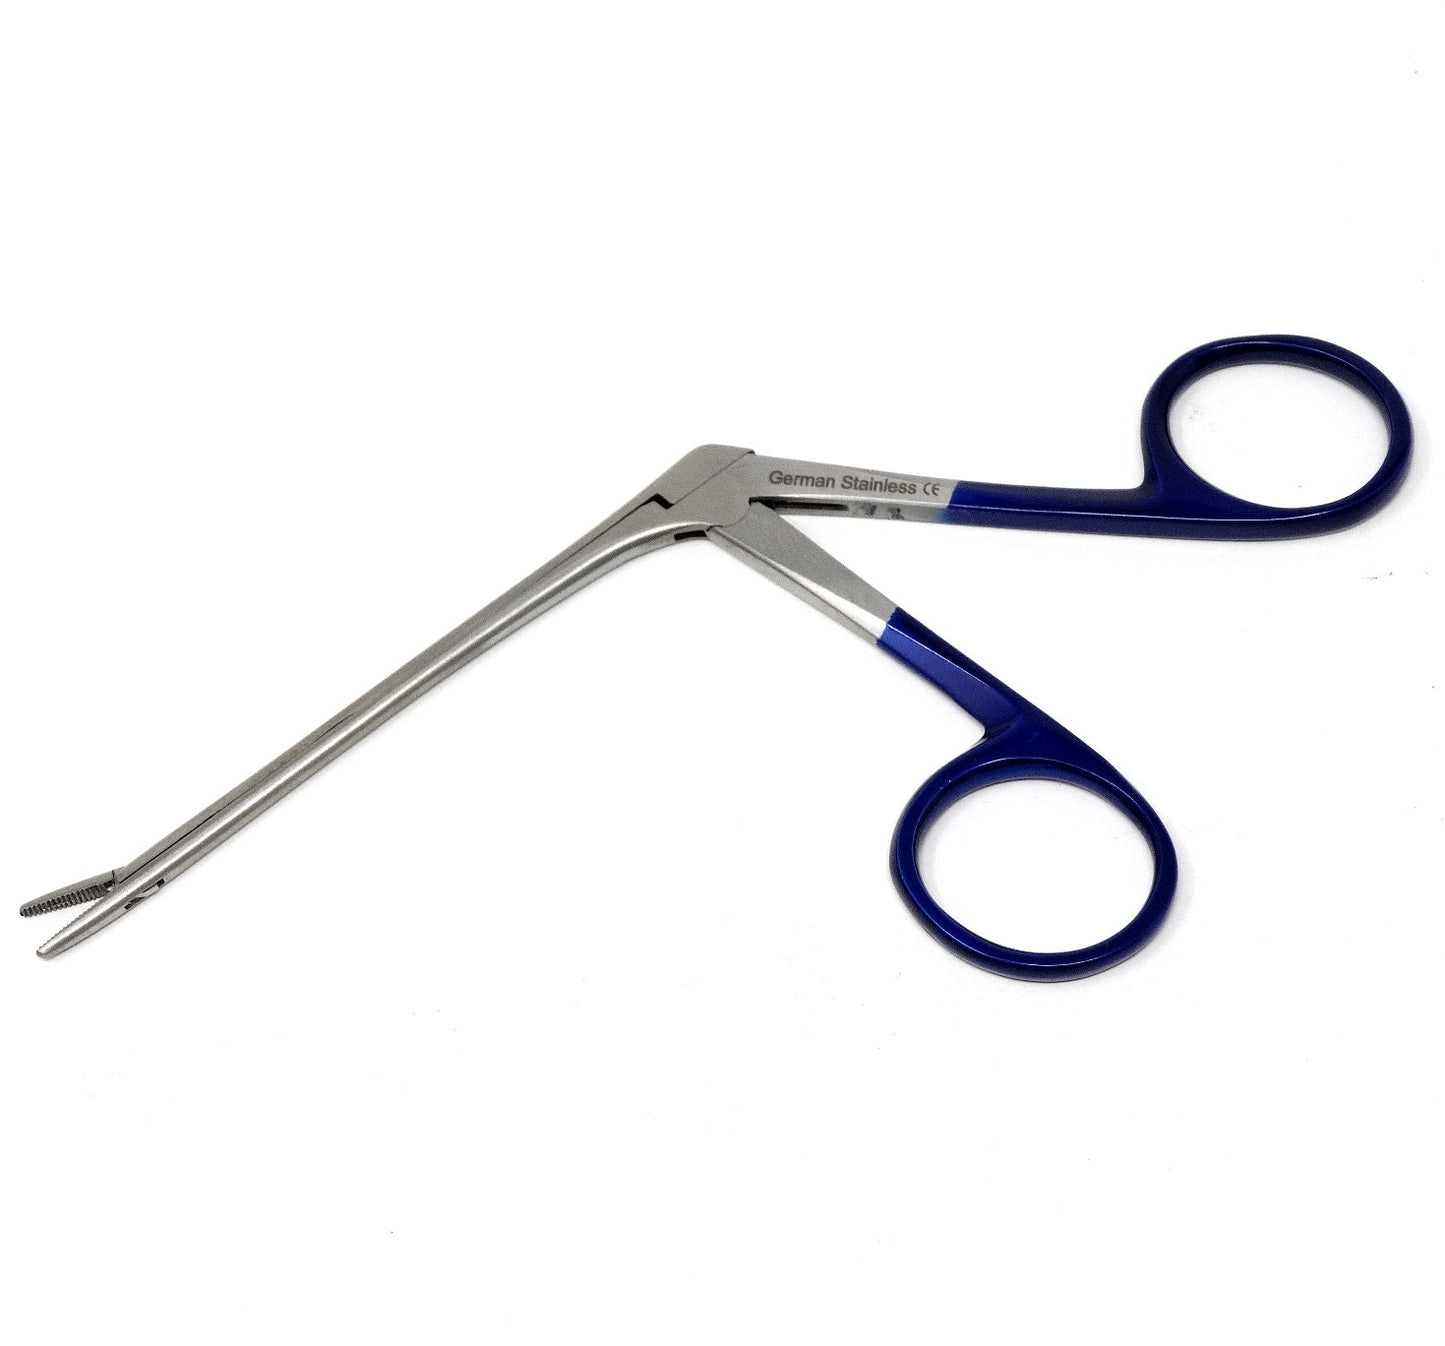 IMS-ALG02 Premium Quality Ear Wax Removing Removal Forceps 3.5" Shank, With Metallic Blue Handle, Serrated Jaws